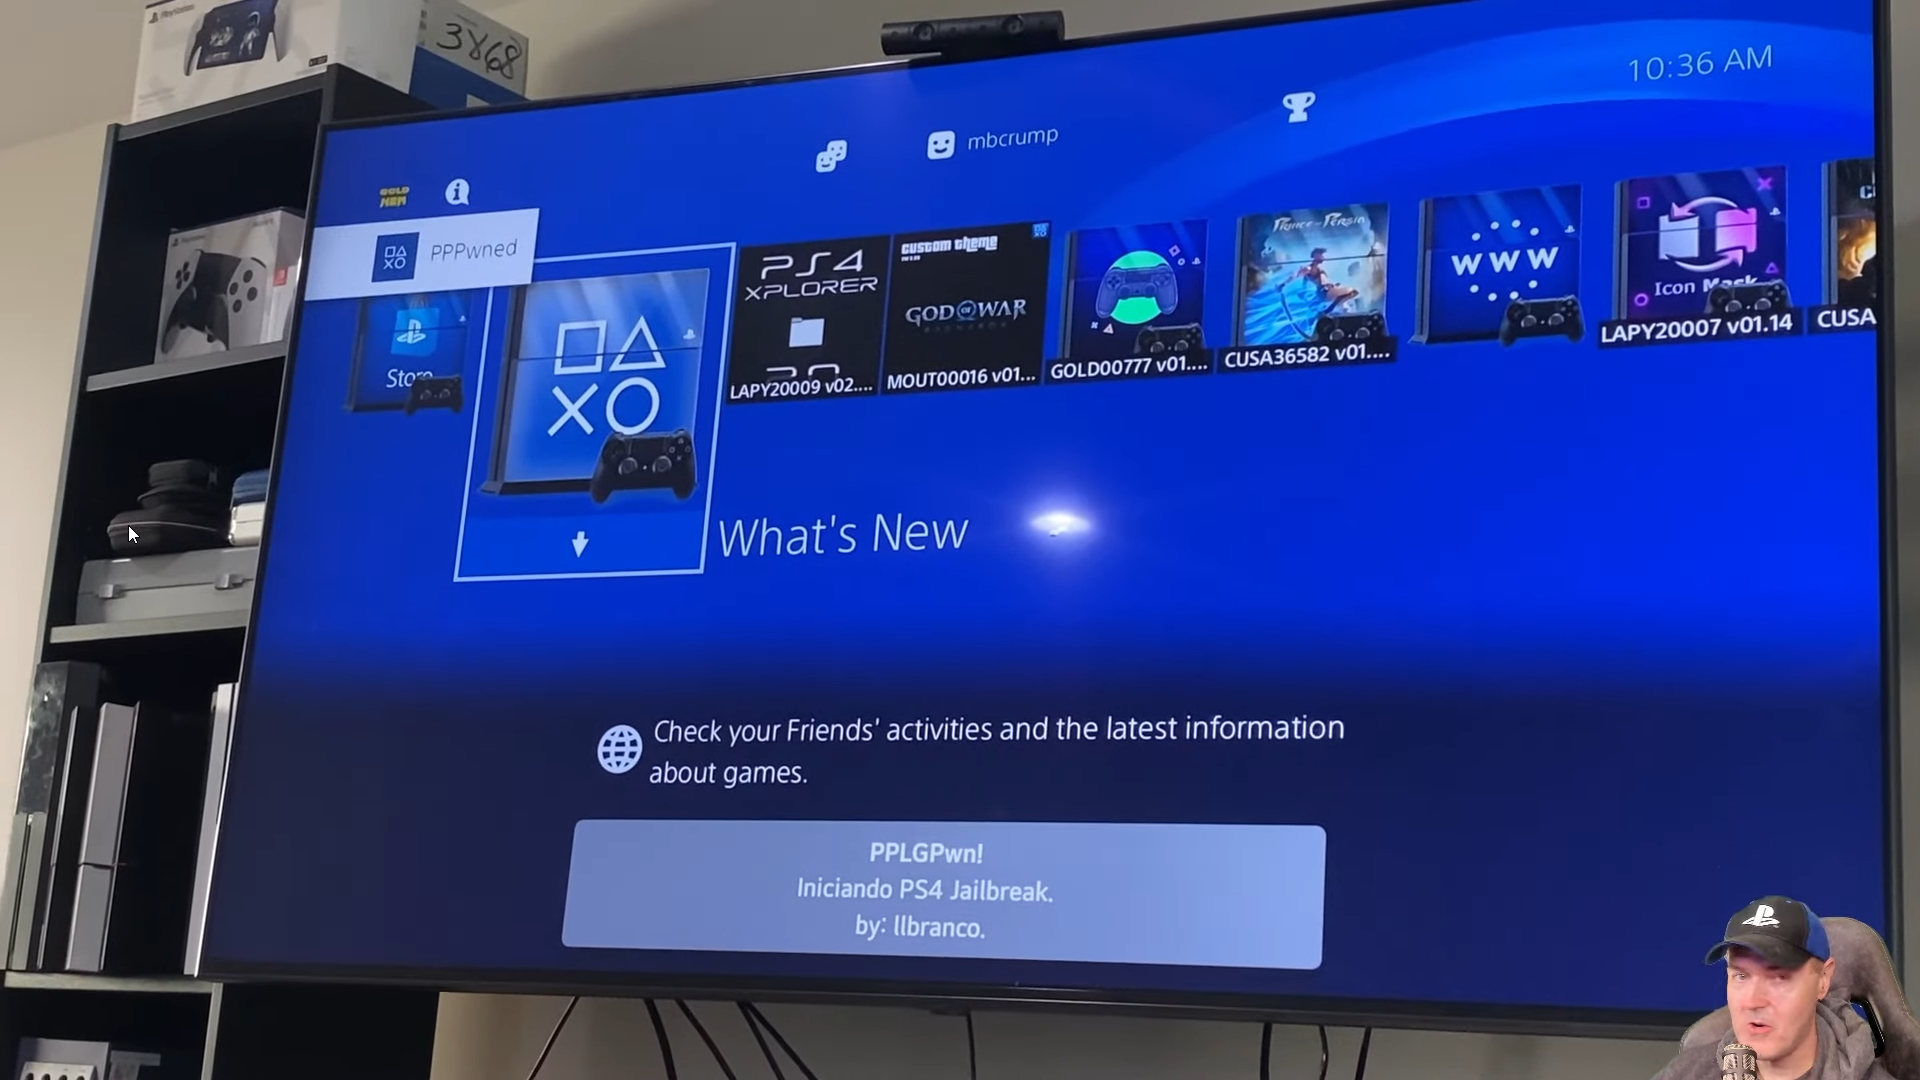 You Can Now Jailbreak A PS4 With An LG TV